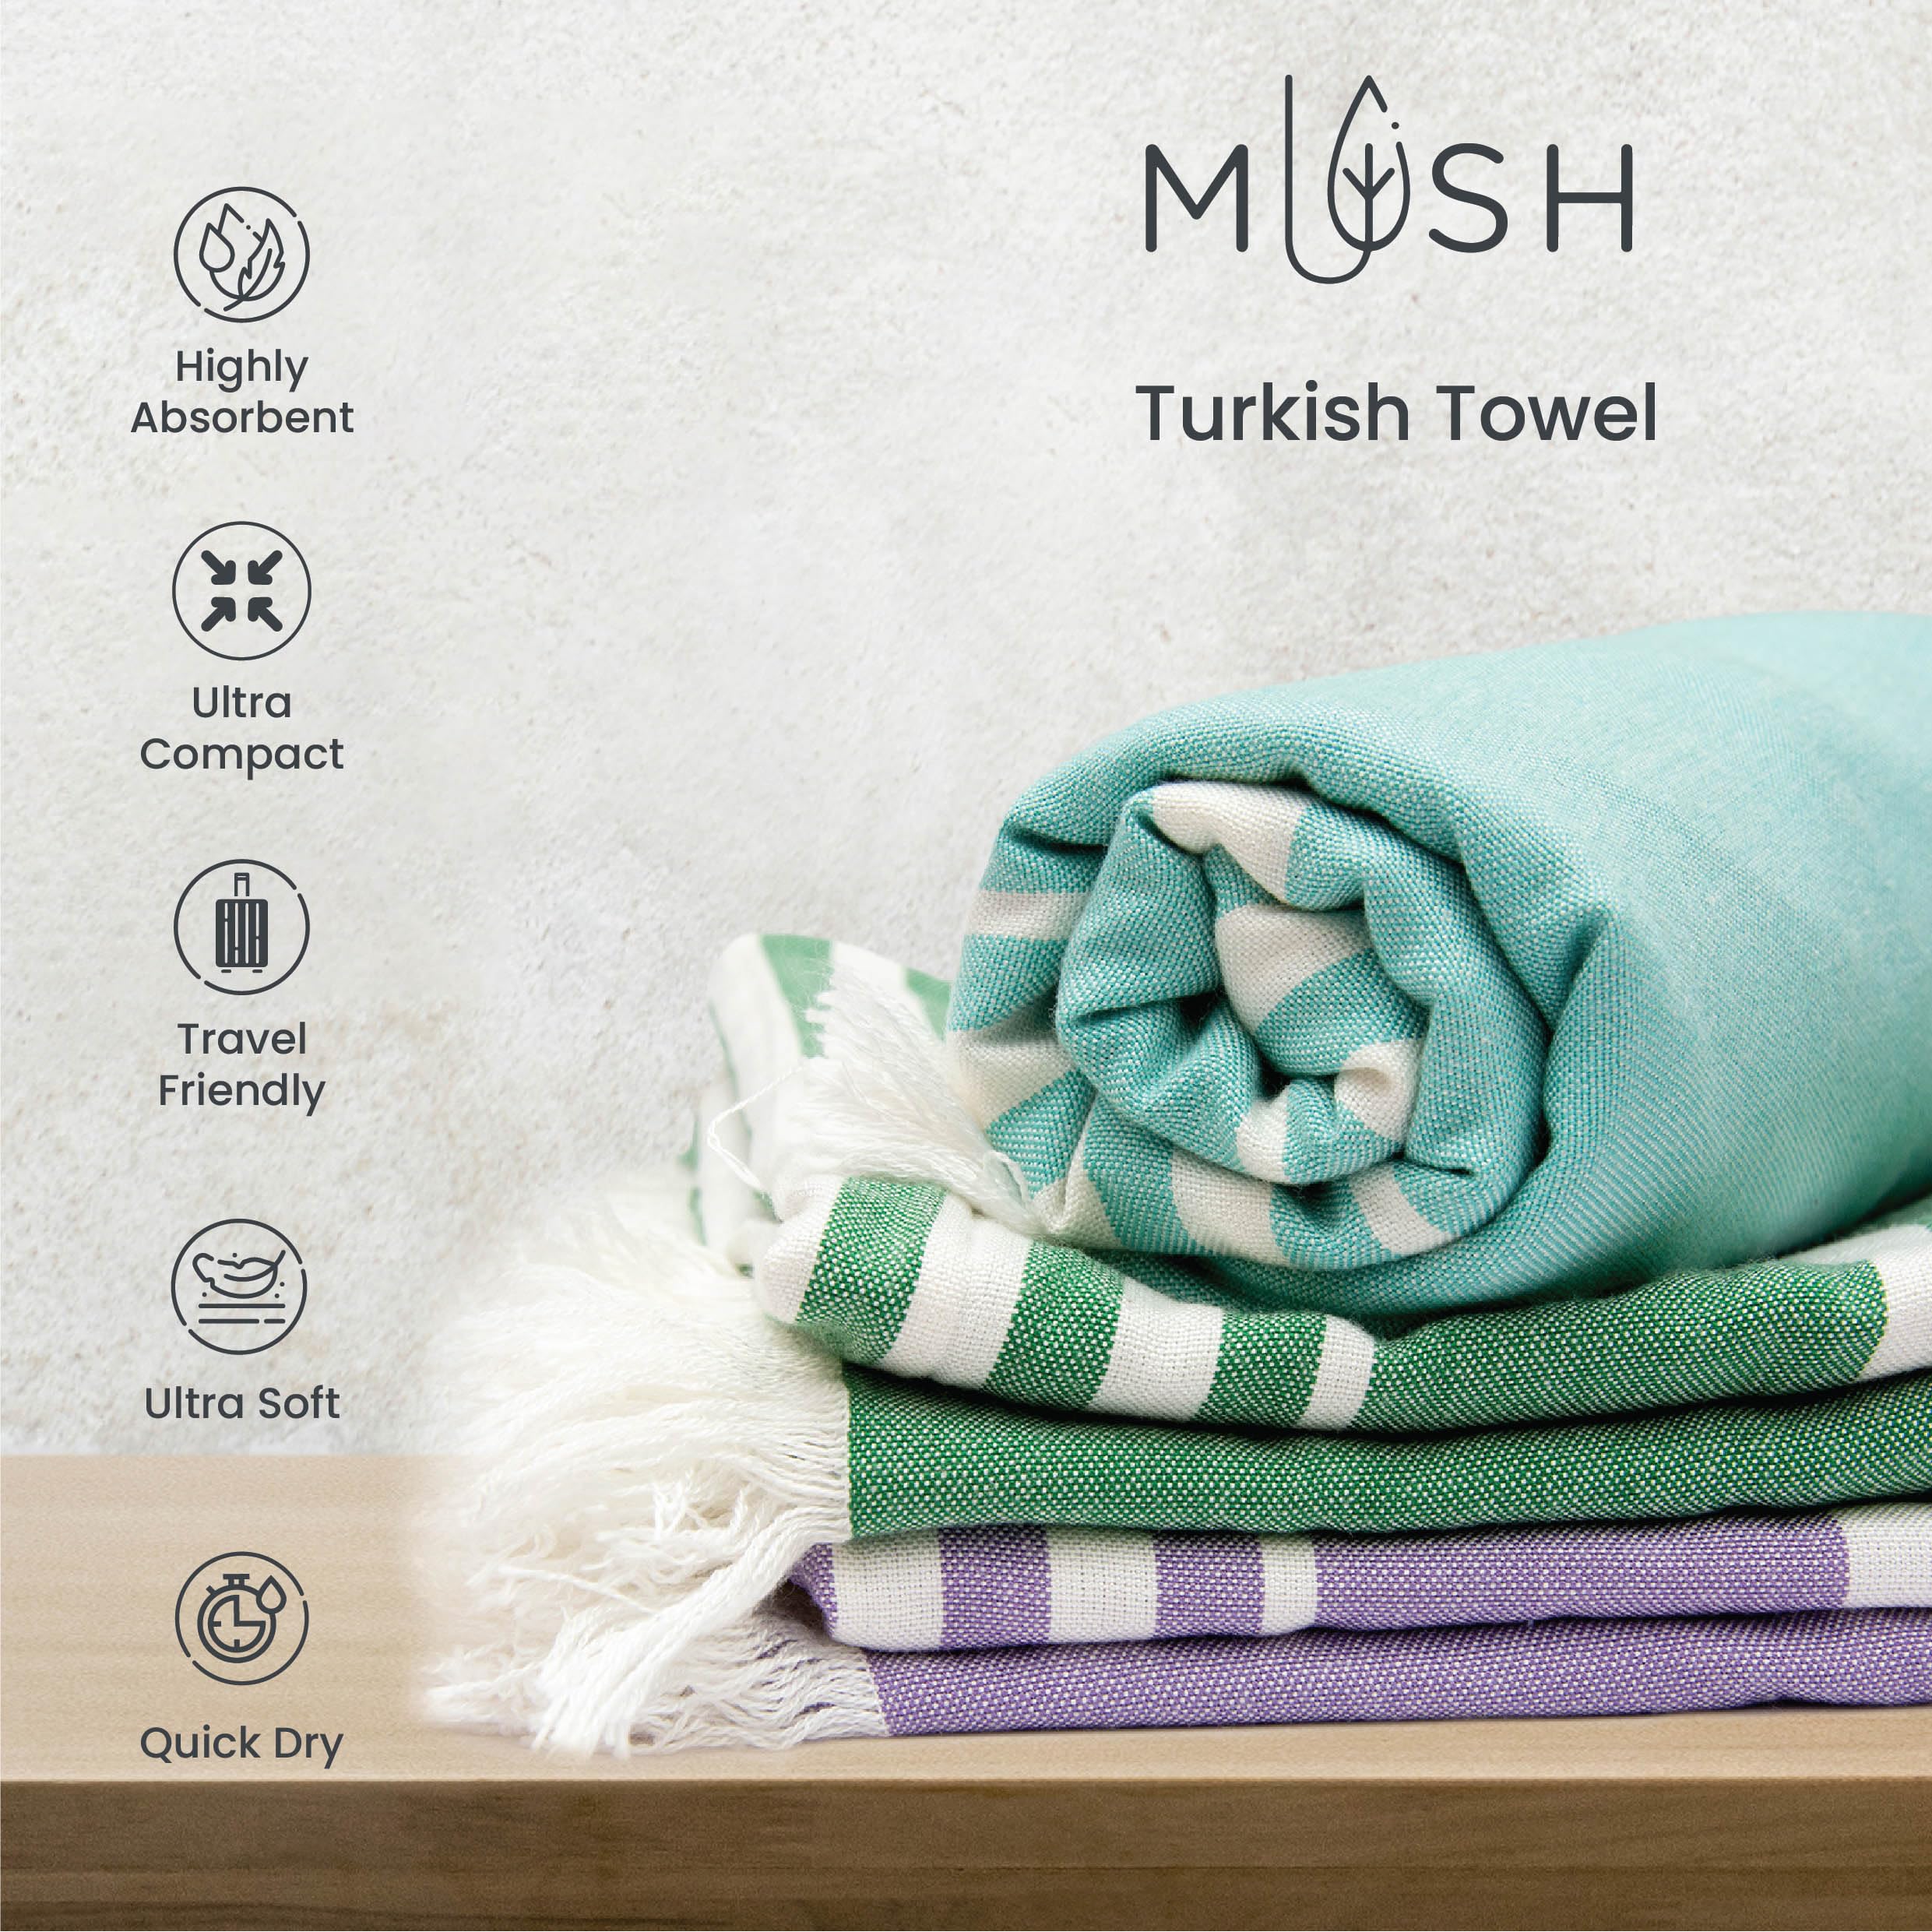 Mush Bamboo Turkish Towel Set: Perfect Diwali, Wedding, Housewarming, Anniversary Gifts for Women, Men, Couples. Soft, Absorbent, Compact, Quick Dry Towel for Bath, Travel, Gym, Beach, Pool, Yoga (Gift Box : 2 Blue - Lavender)